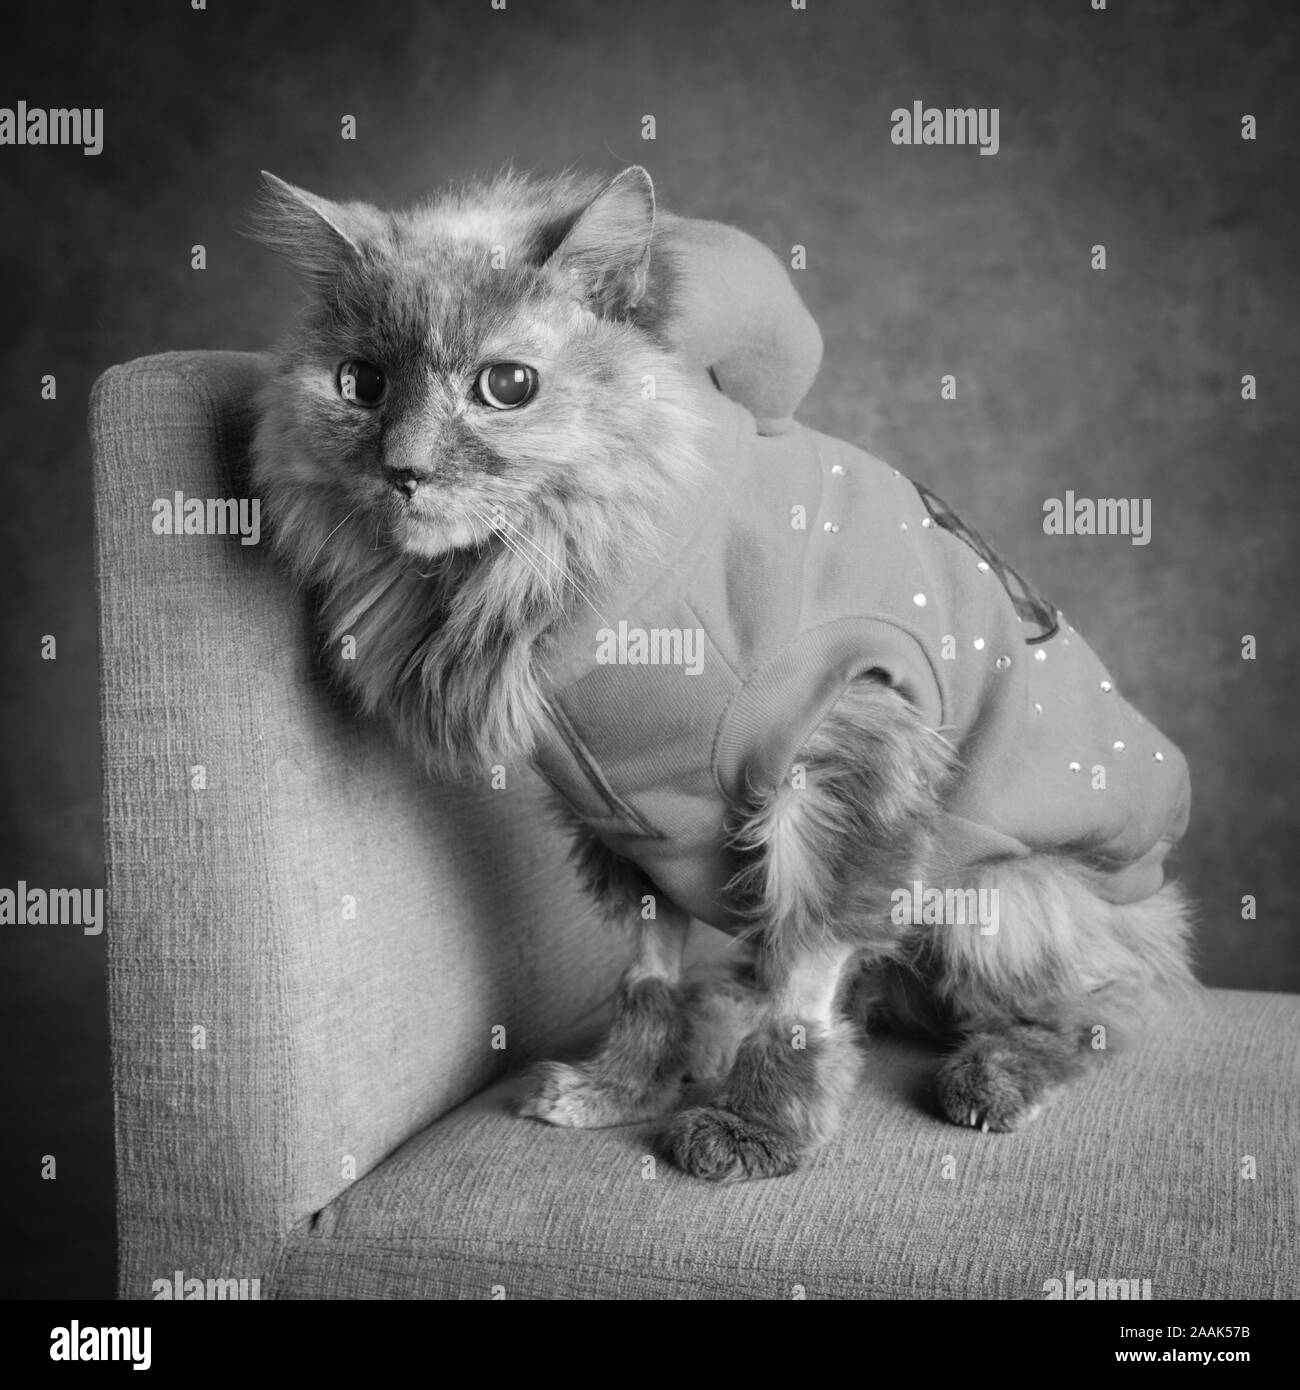 Studio shot of long haired cat wearing vest sitting on chair Stock Photo